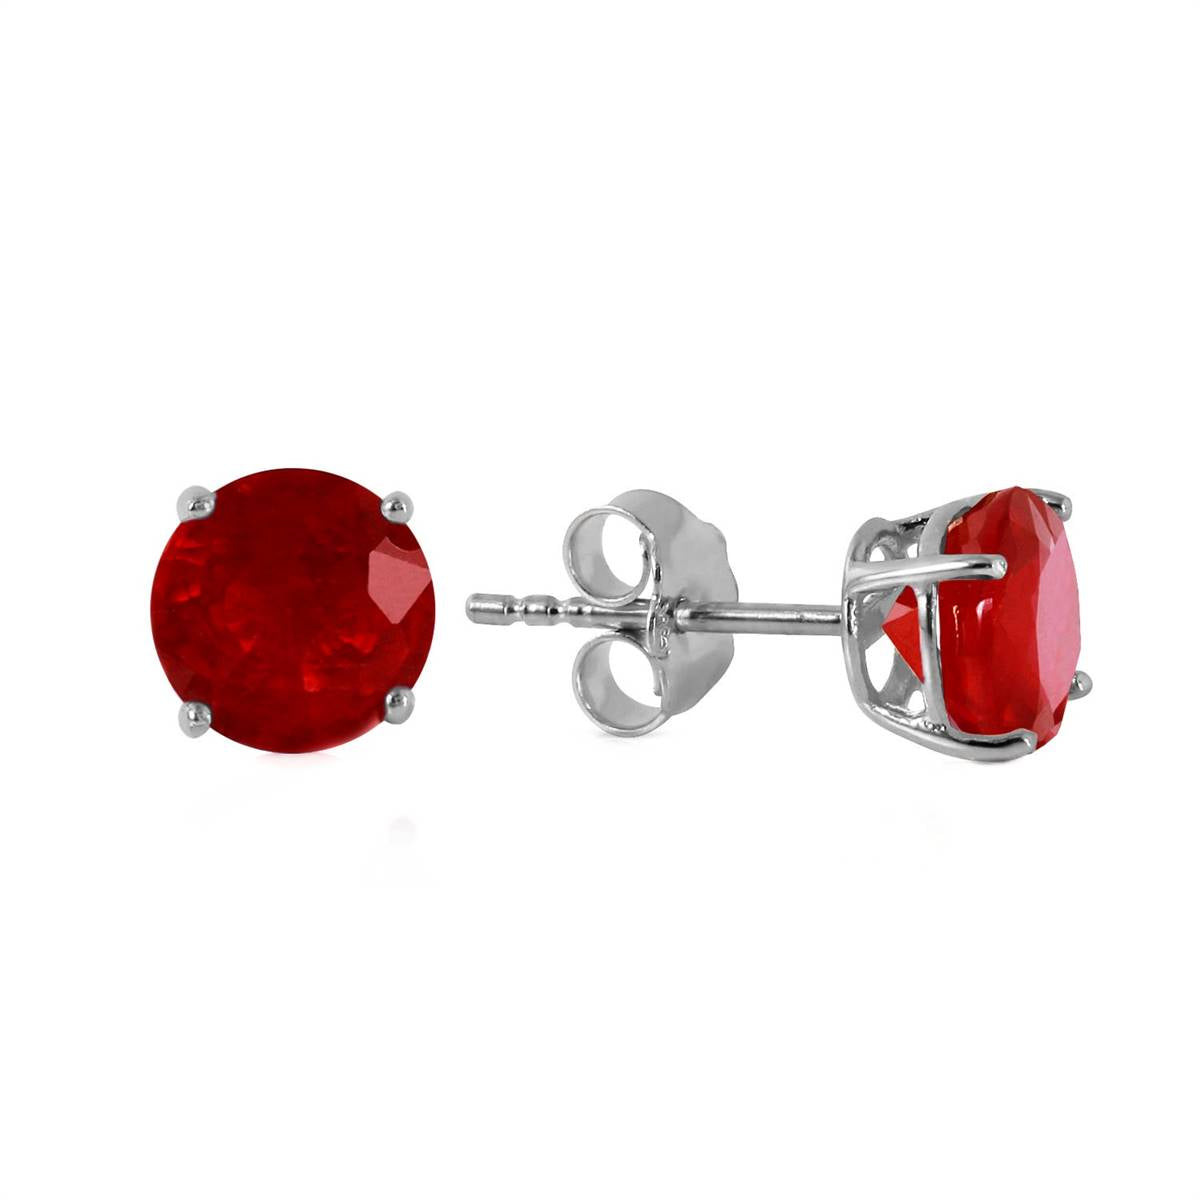 0.95 Carat 14K Solid White Gold Kiss Goodnight Ruby Earrings